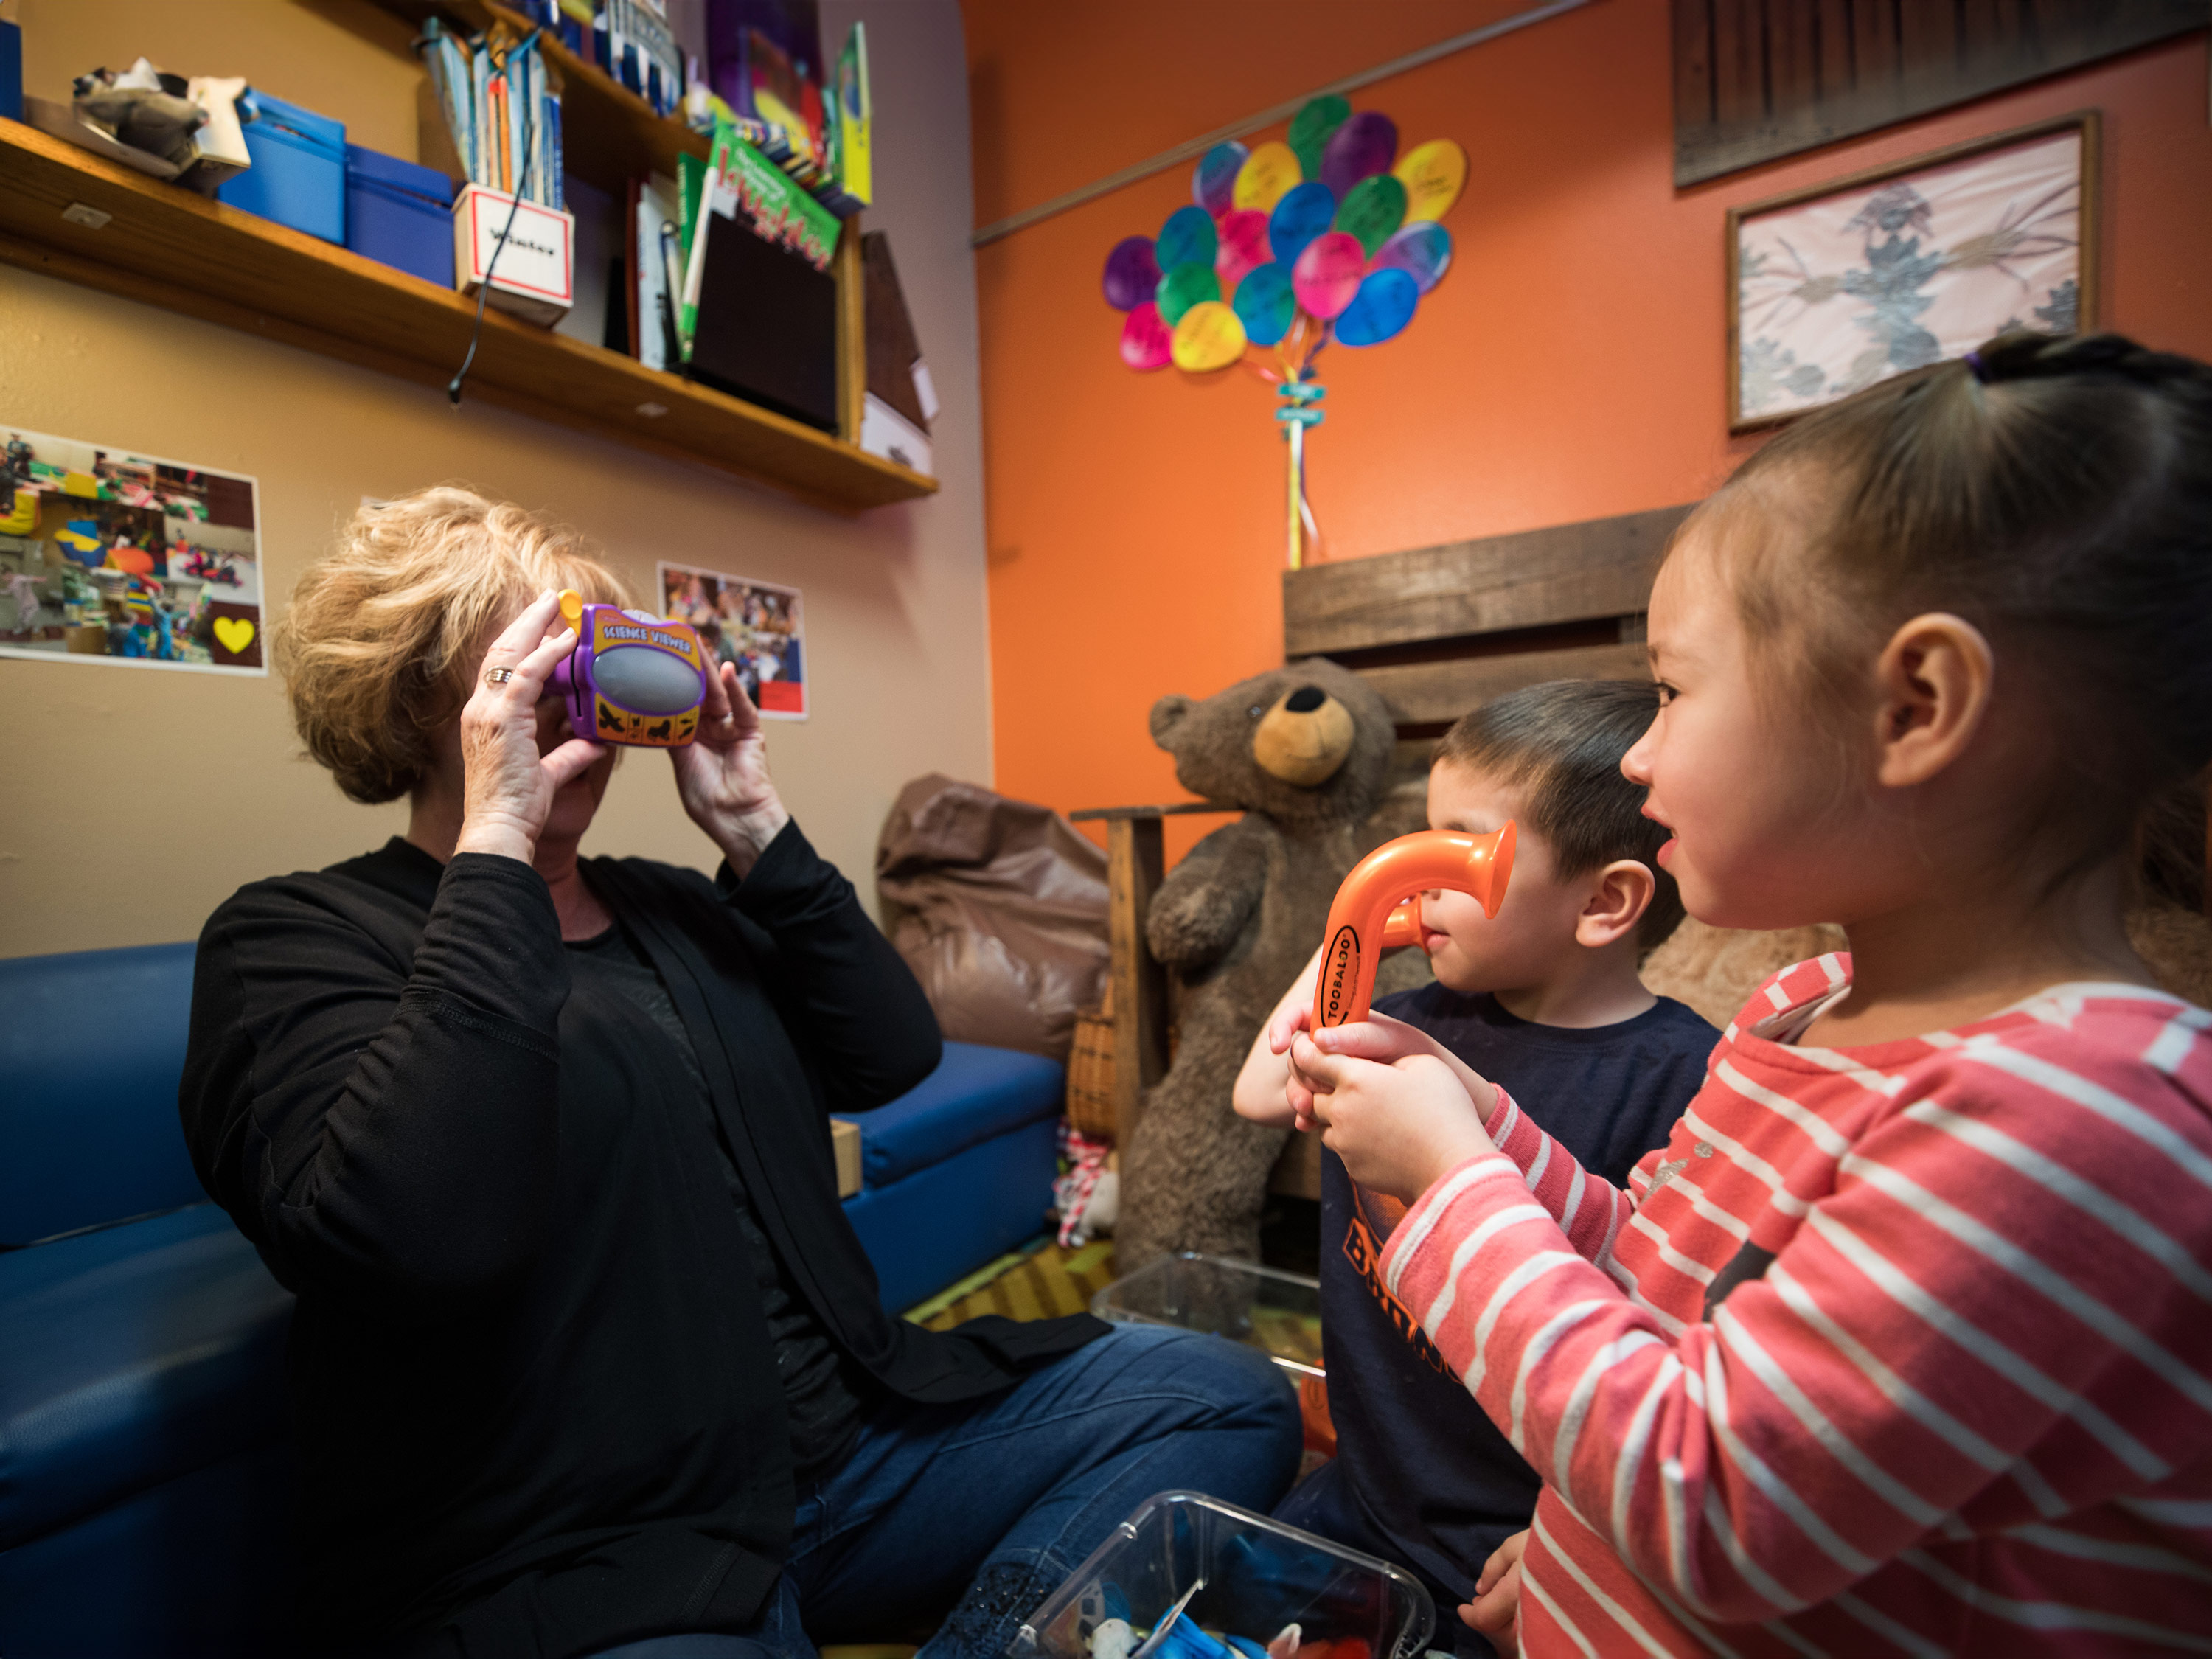 An educator shows students how to use a viewmaster in a classroom